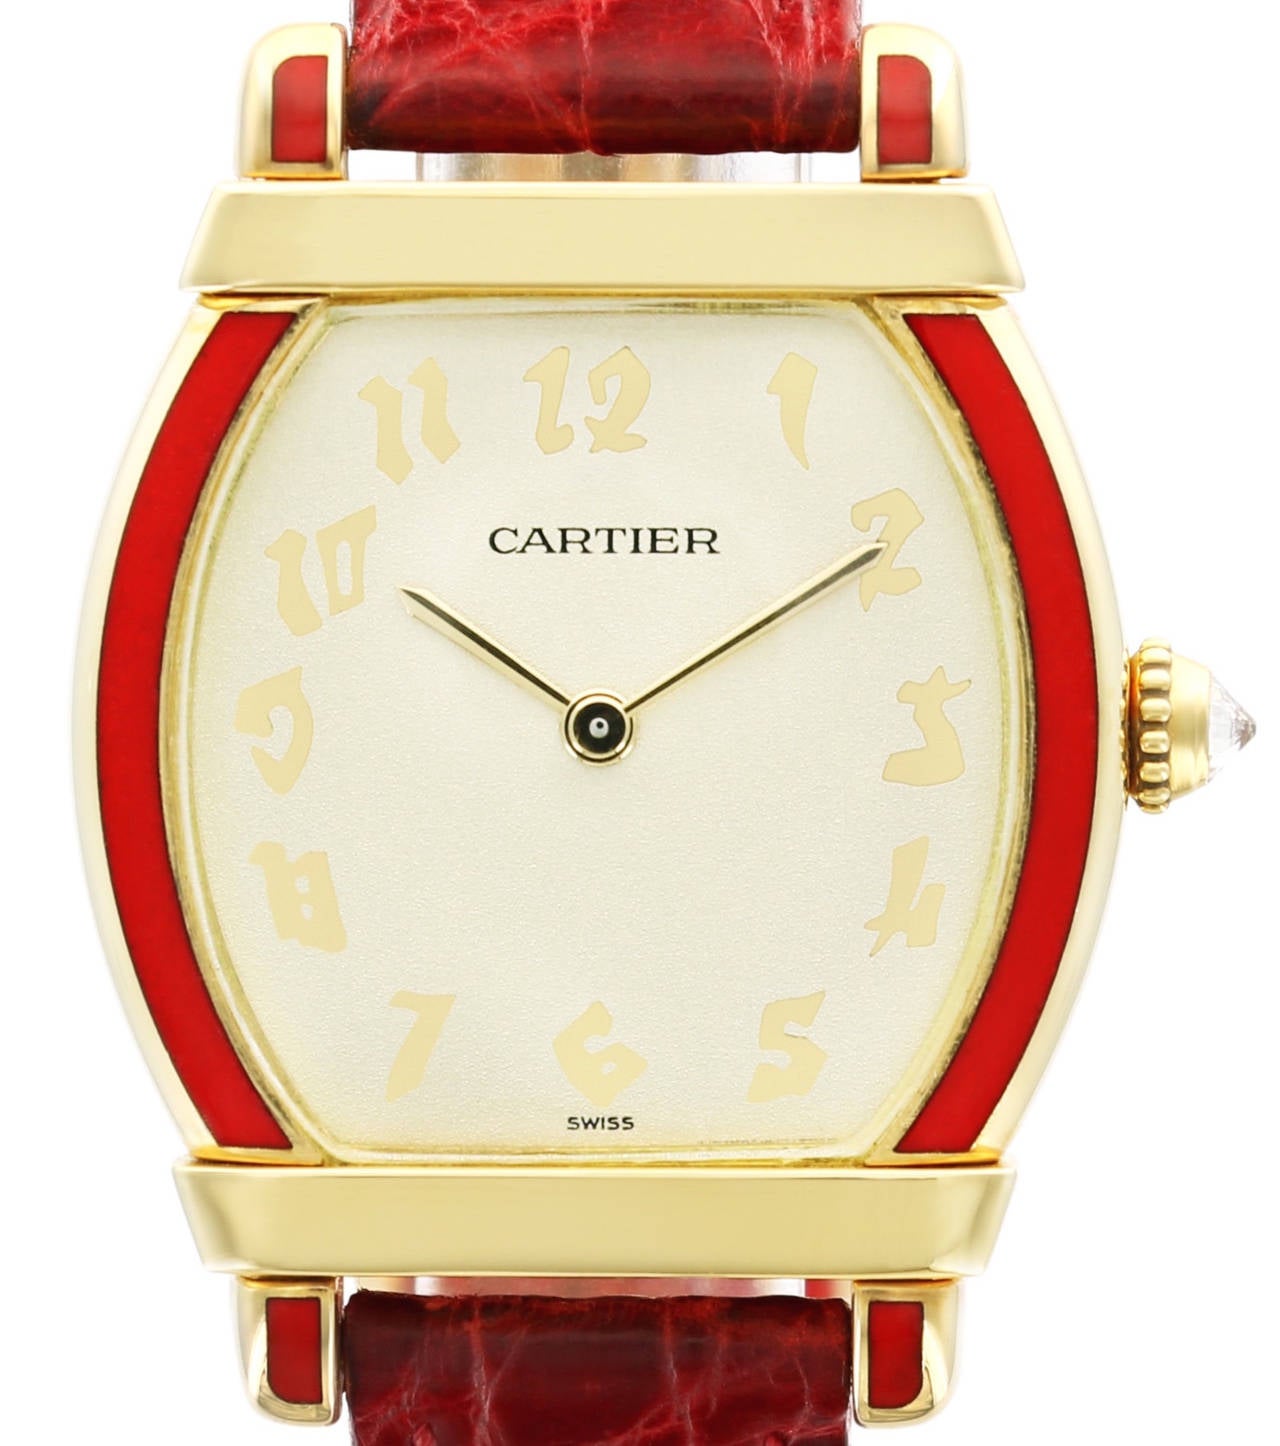 This rare and gorgeous Cartier Tortue watch features Chinese-style Arabic numerals, red enamel enhanced bezel, diamond-set crown and 18k yellow gold case. This is a very rare Cartier watch that is sure to impress.